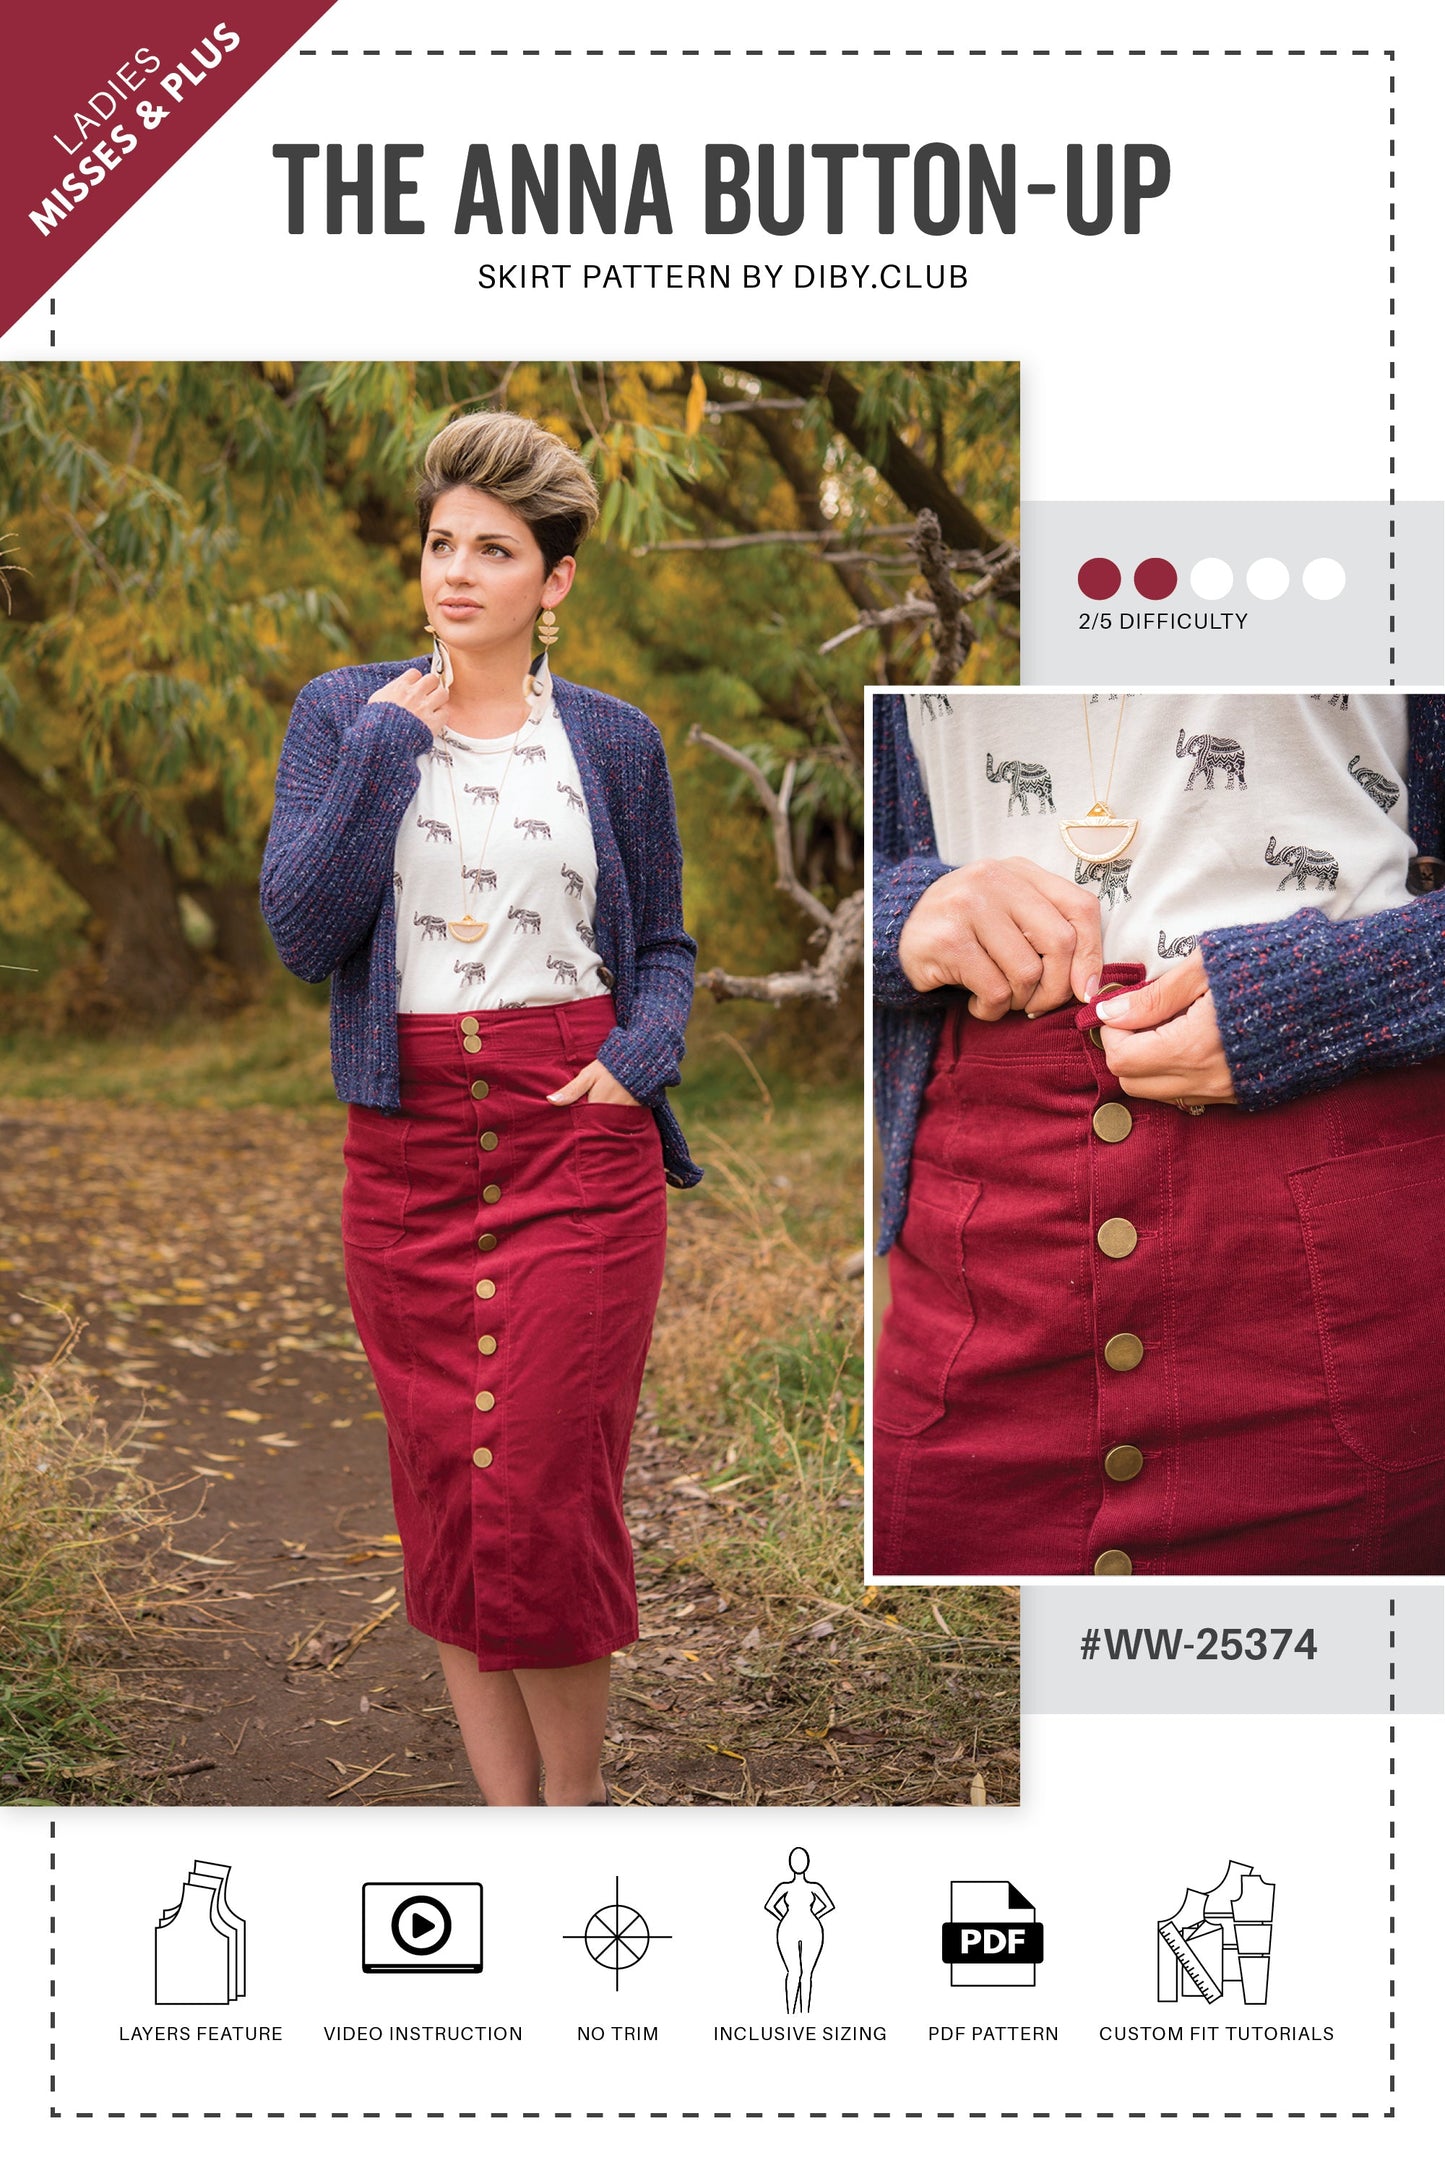 Cover page of DIBY Club Anna Button-Up Skirt Instruction Boo showing a woman wearing a red corduroy Anna Button-Up skirt with flat gold buttons. And a close up of the skirt showing two pockets.